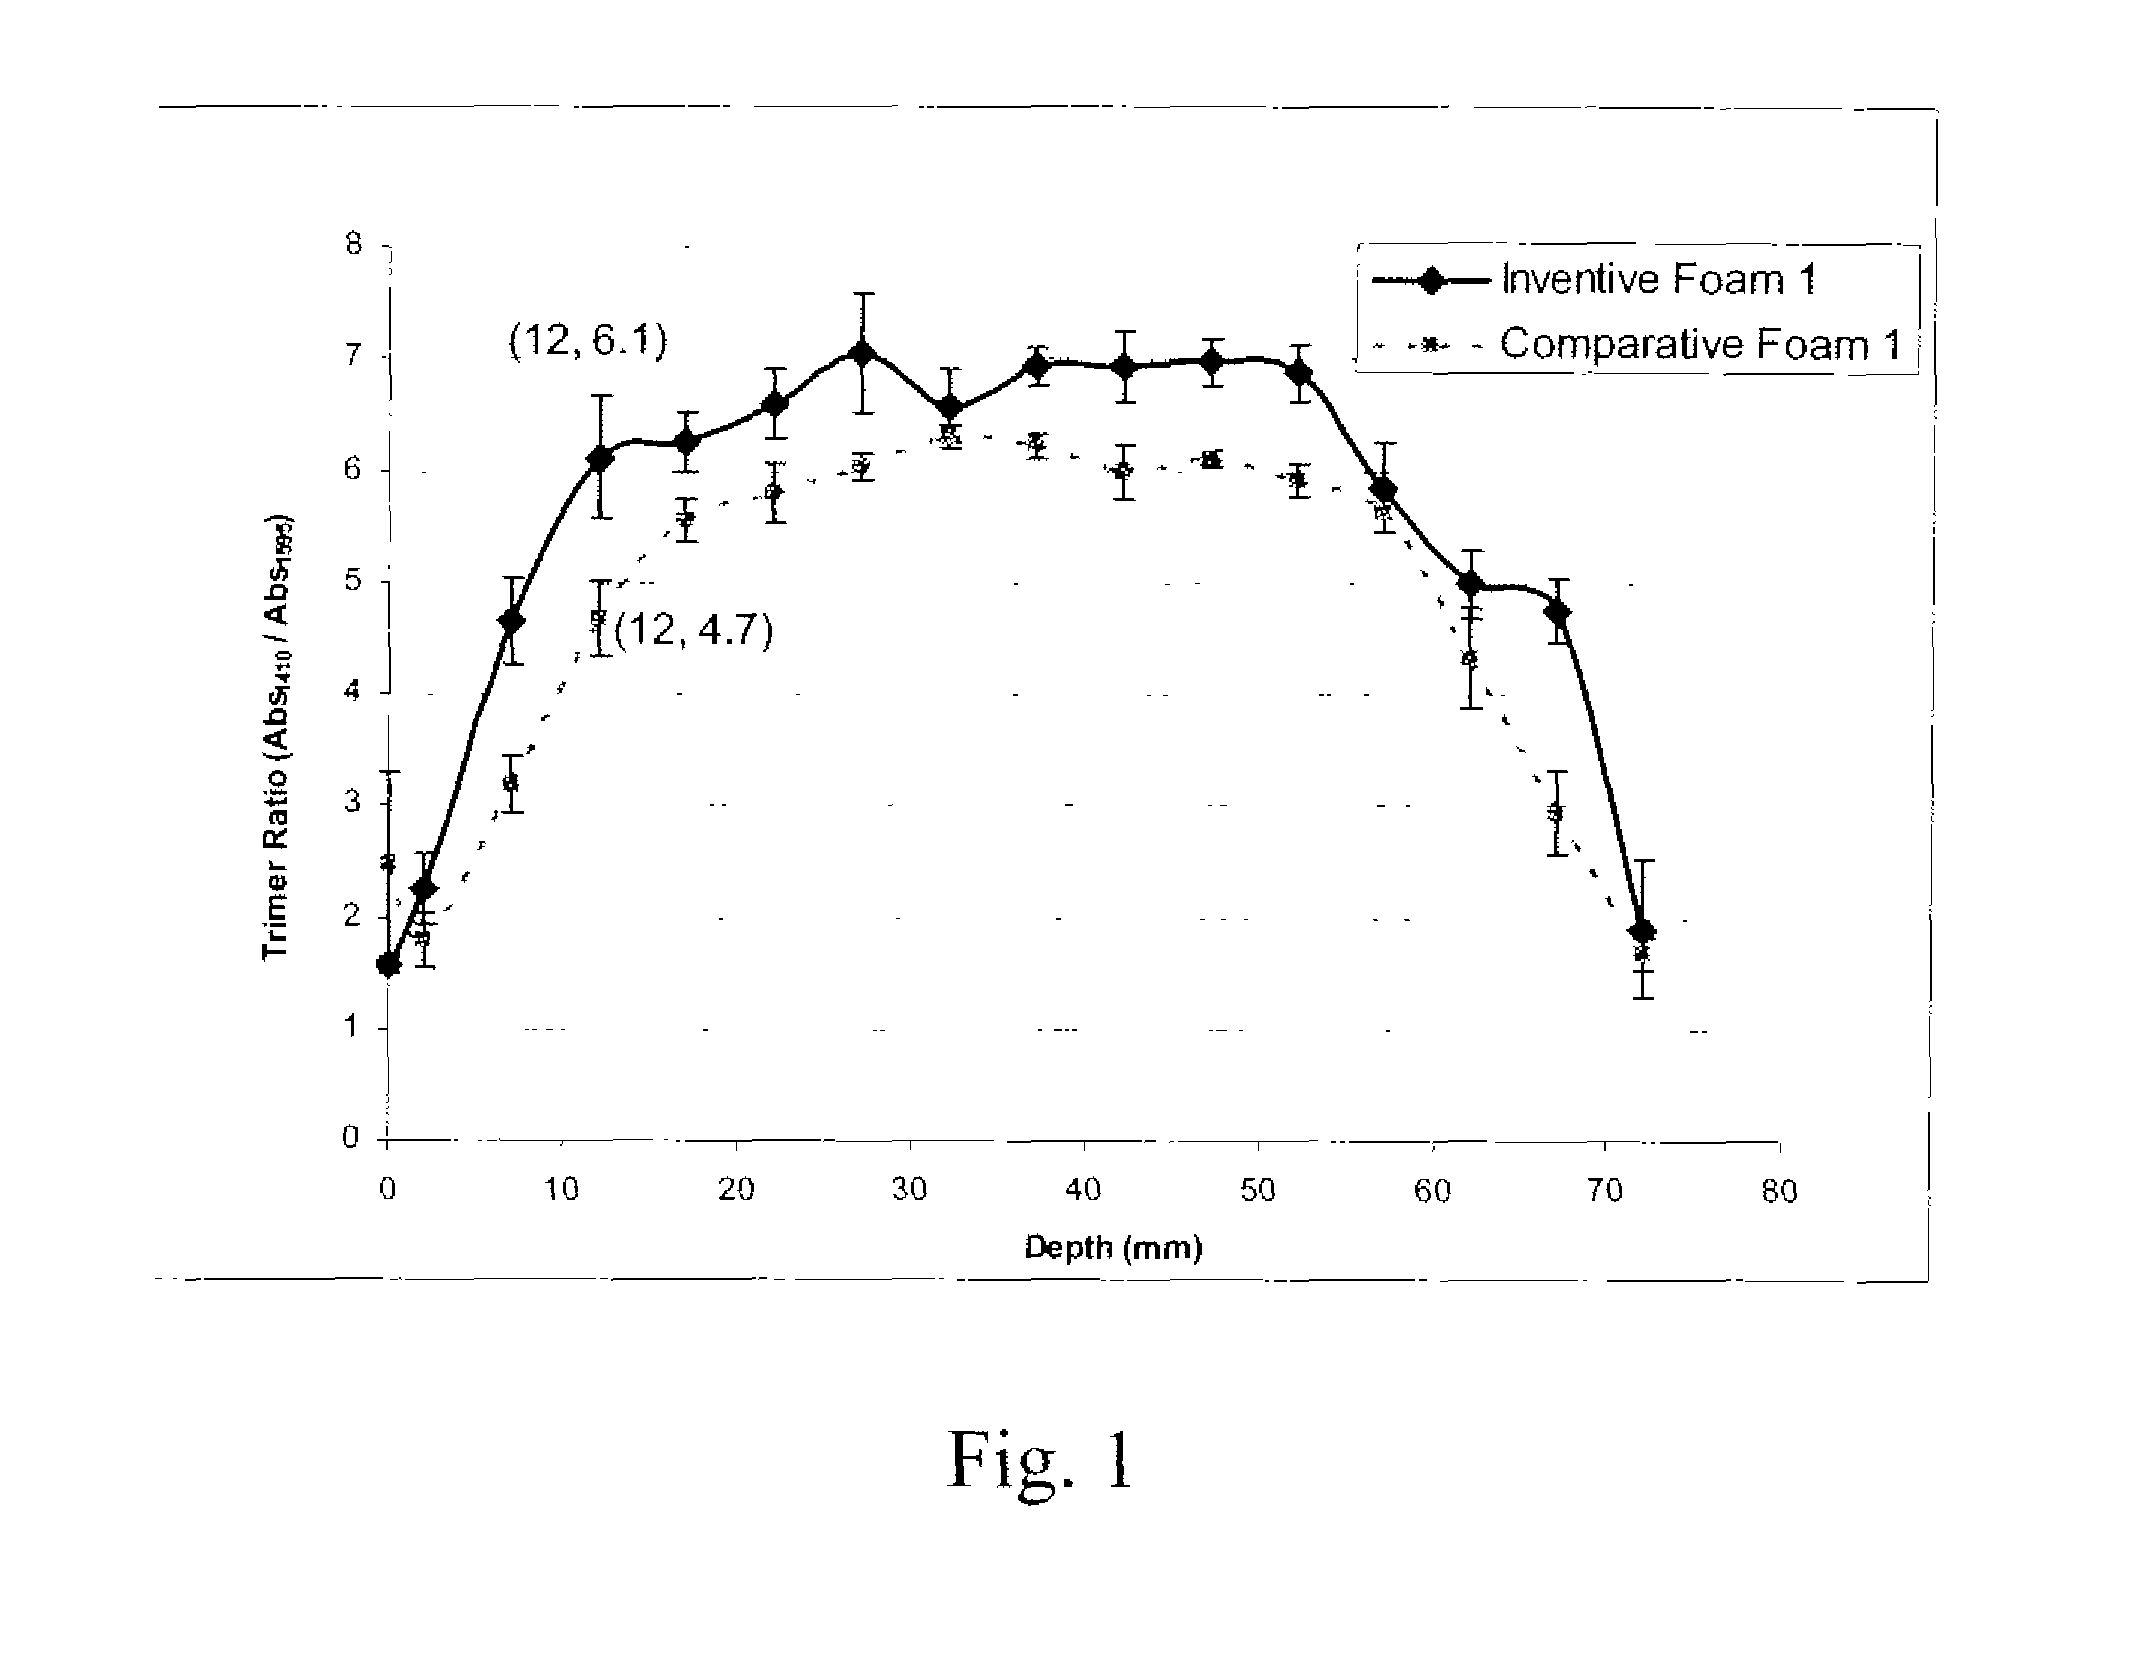 Isocyanate trimerisation catalyst system, a precursor formulation, a process for trimerising isocyanates, rigid polyisocyanurate/polyurethane foams made therefrom, and a process for making such foams